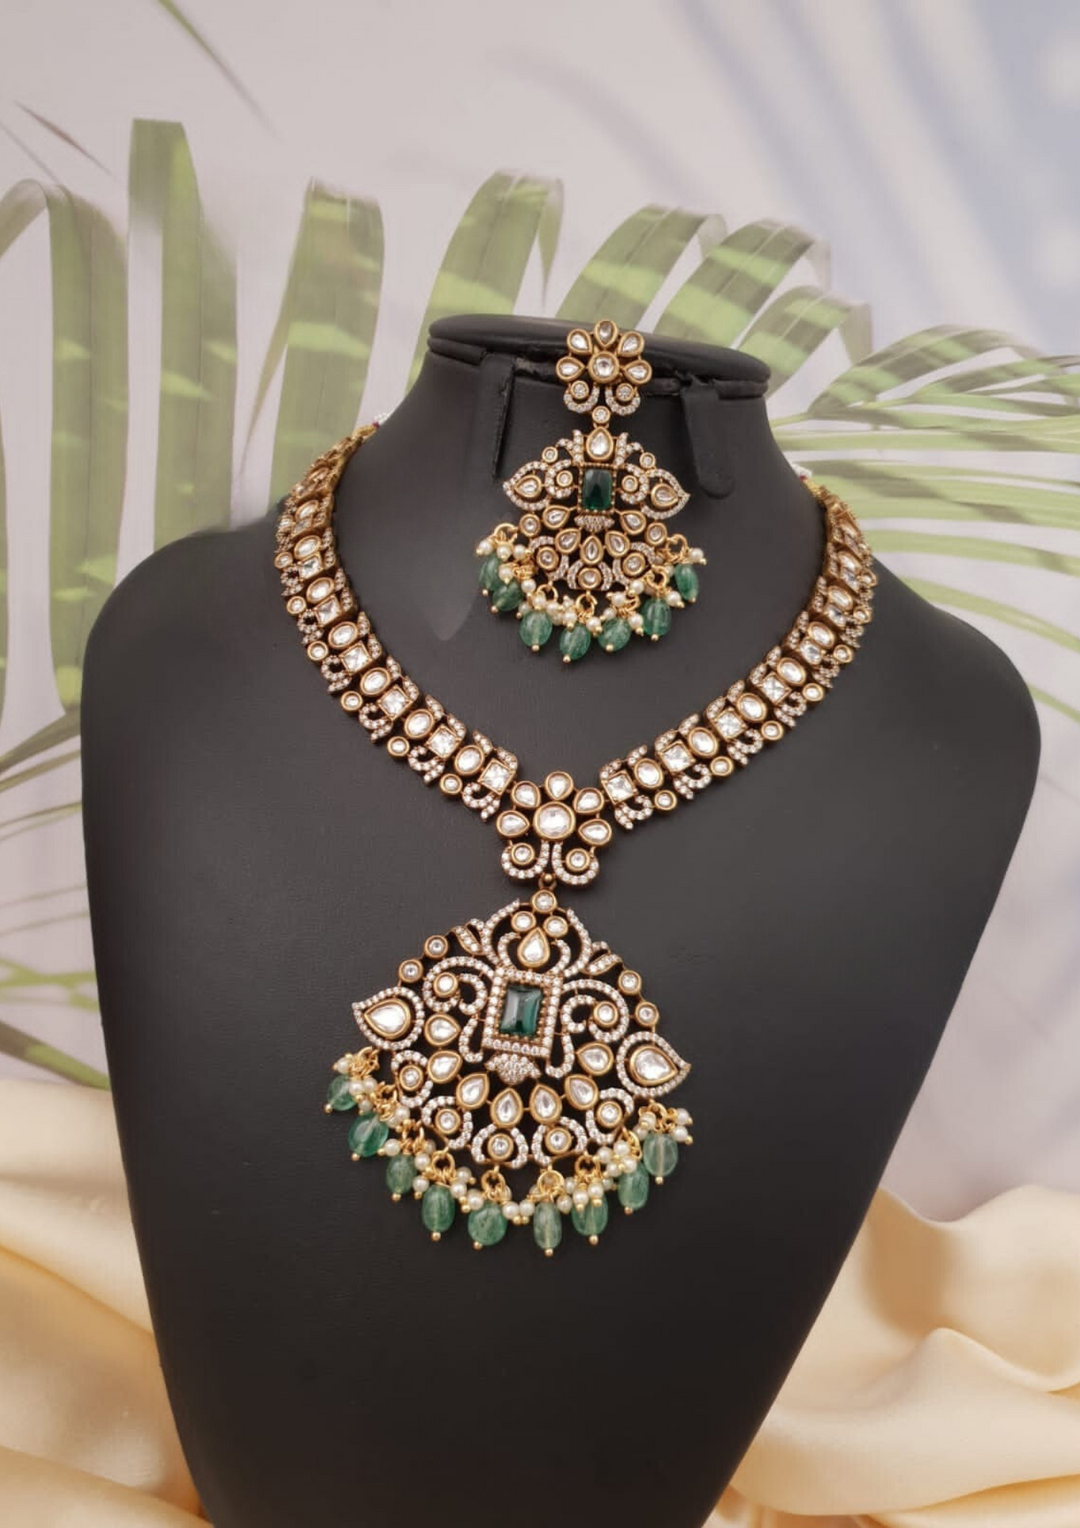 Victorian jewellery necklace set with earrings SSG102850